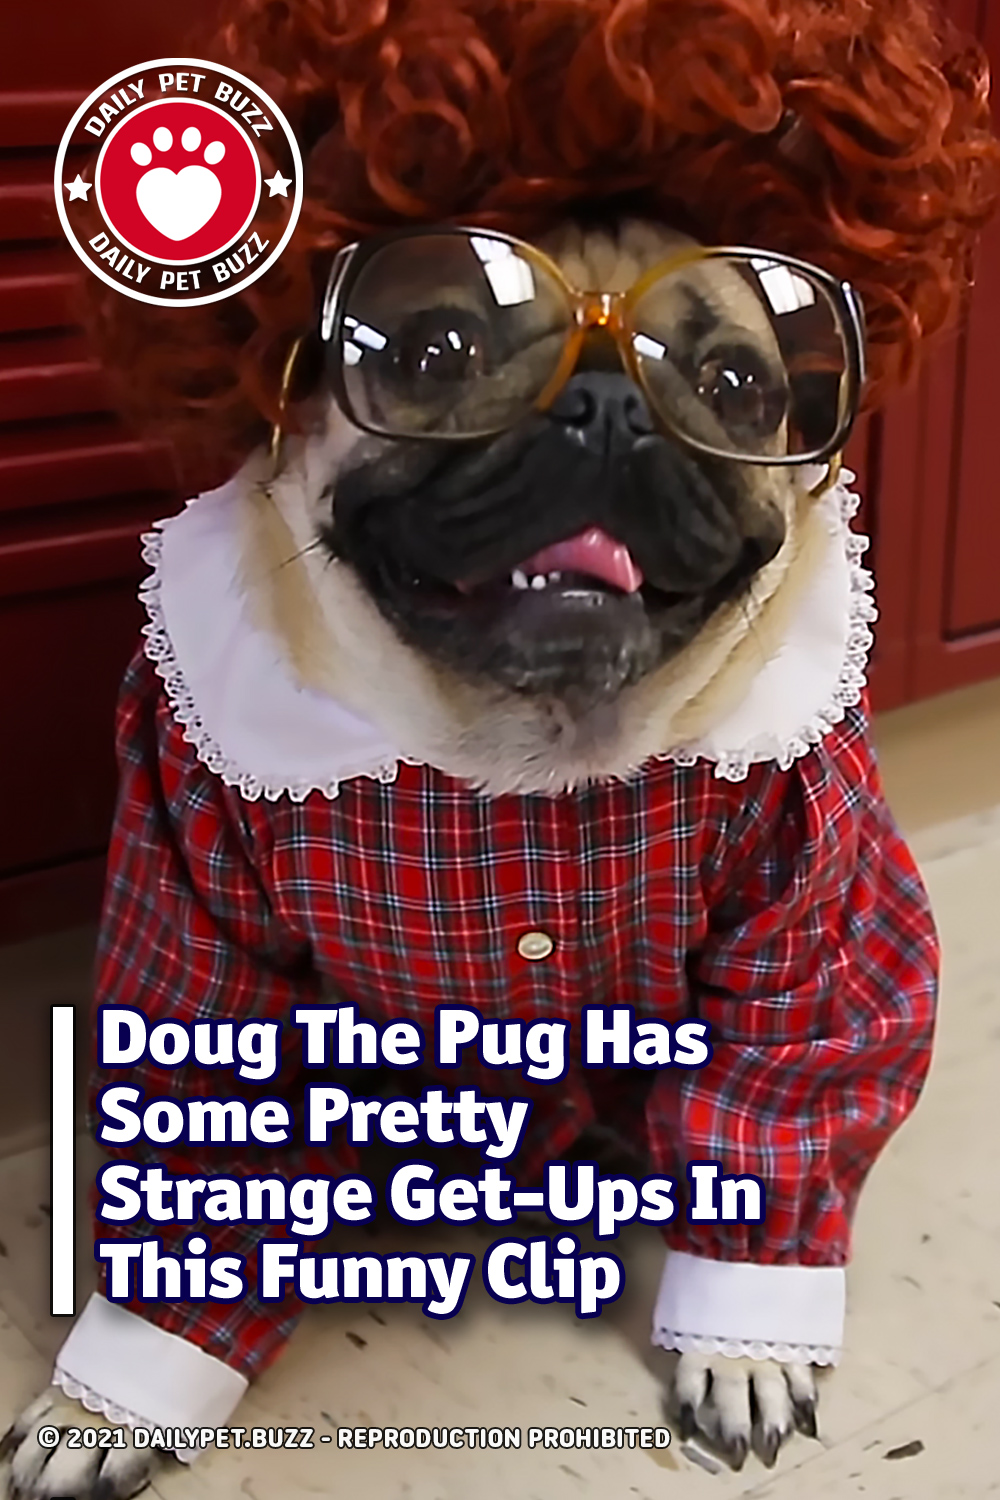 Doug The Pug Has Some Pretty Strange Get-Ups In This Funny Clip